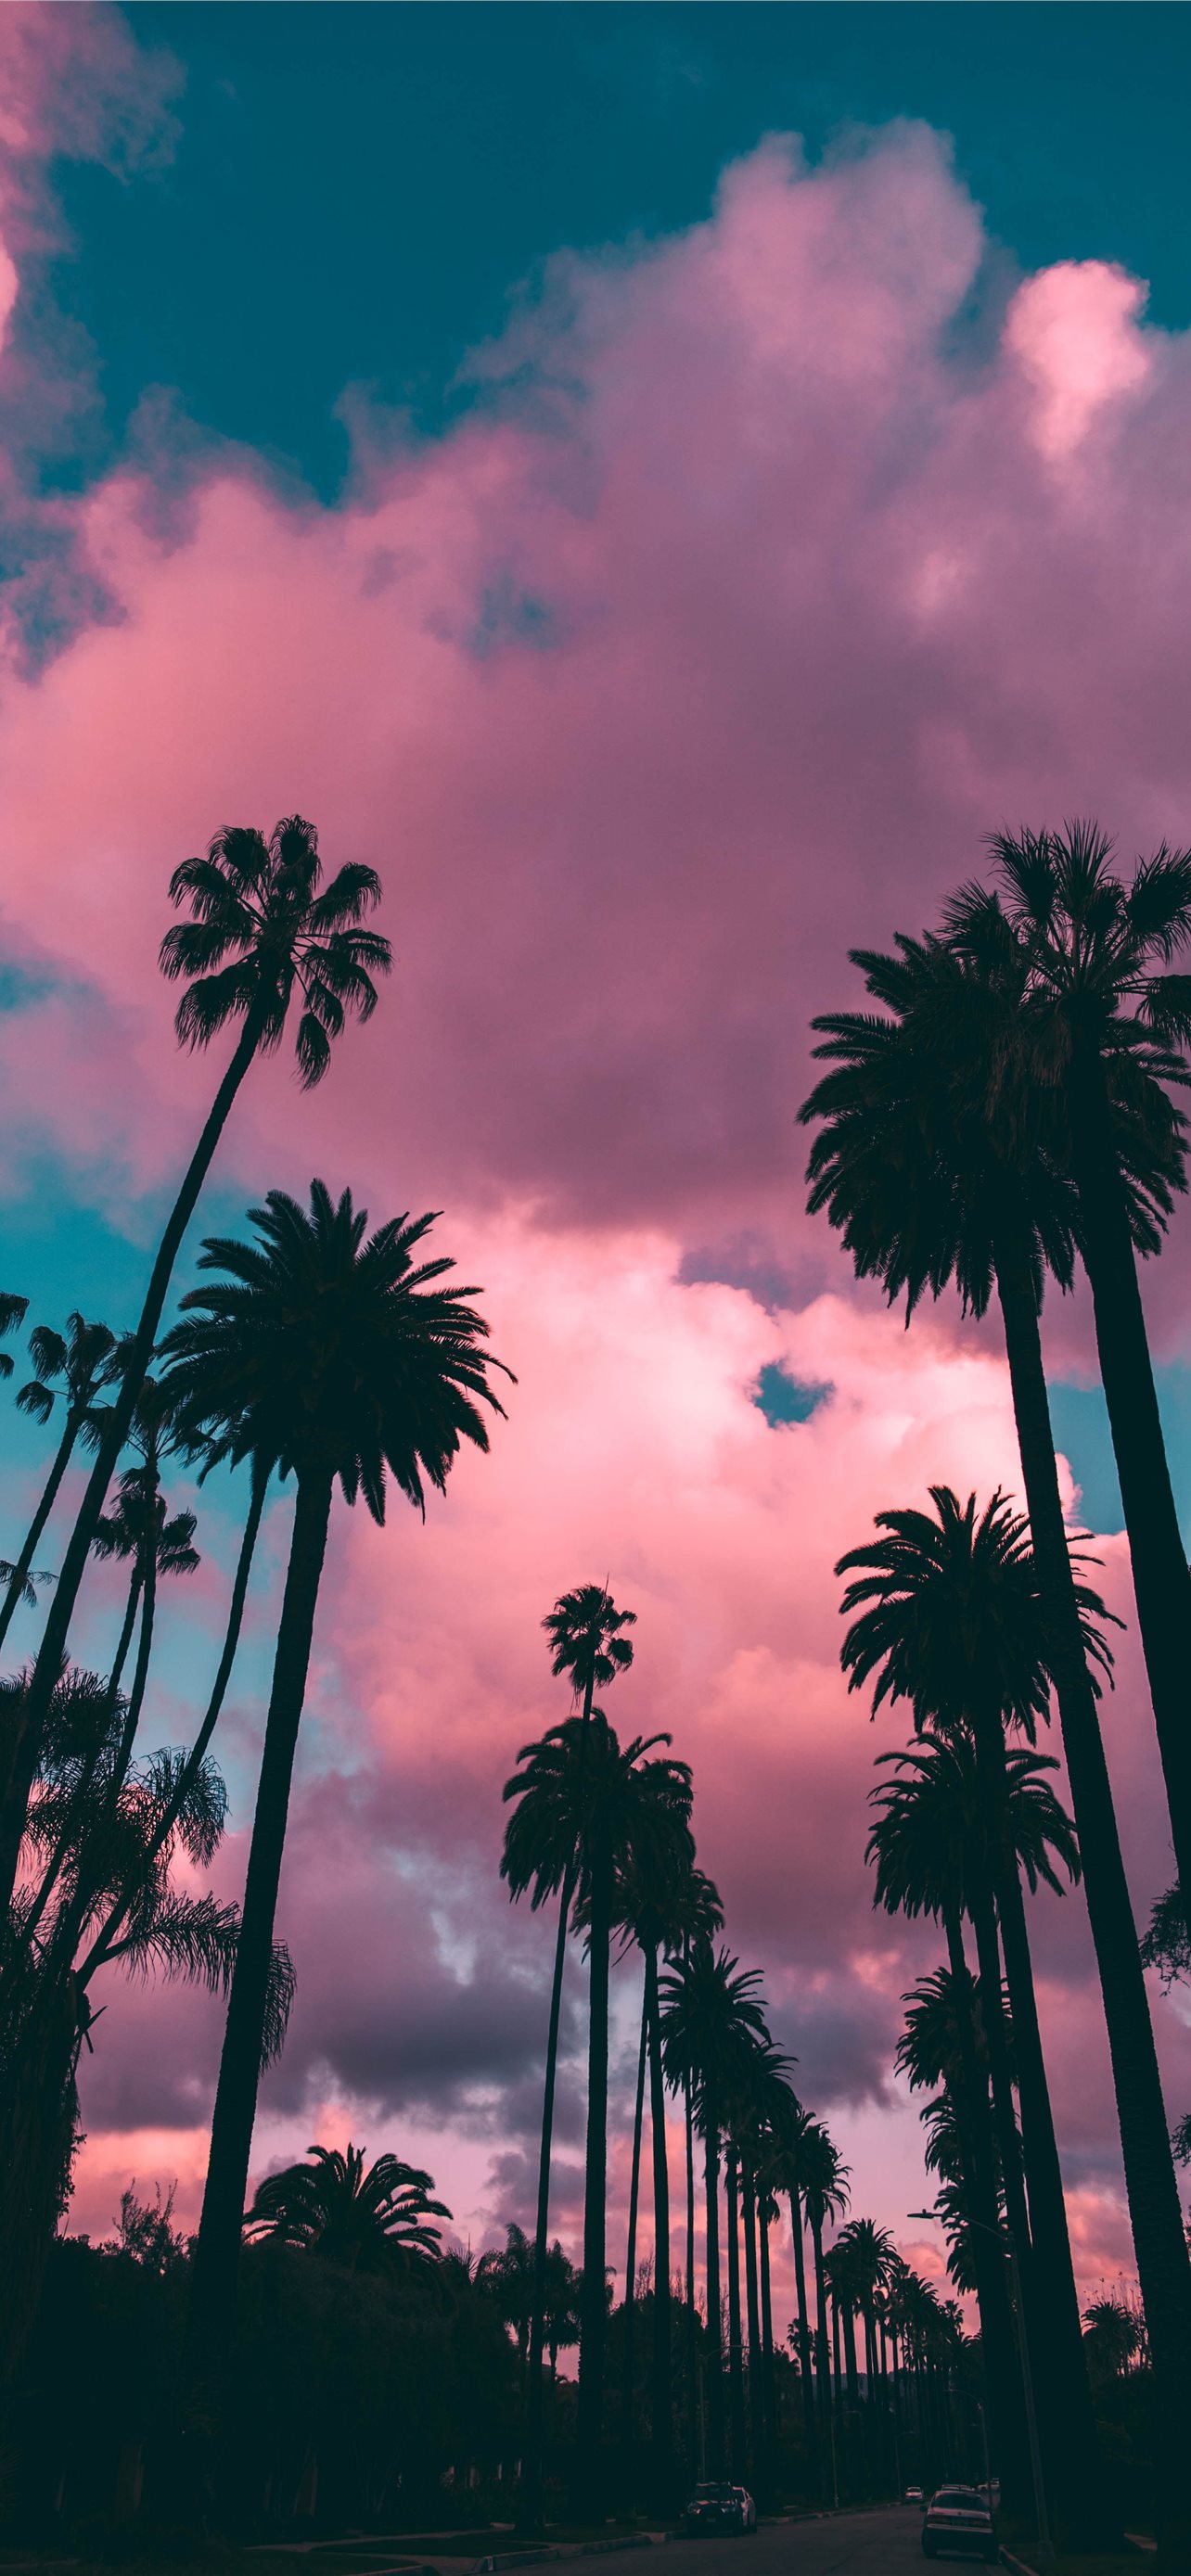 Florida Palm Trees Pictures  Download Free Images on Unsplash